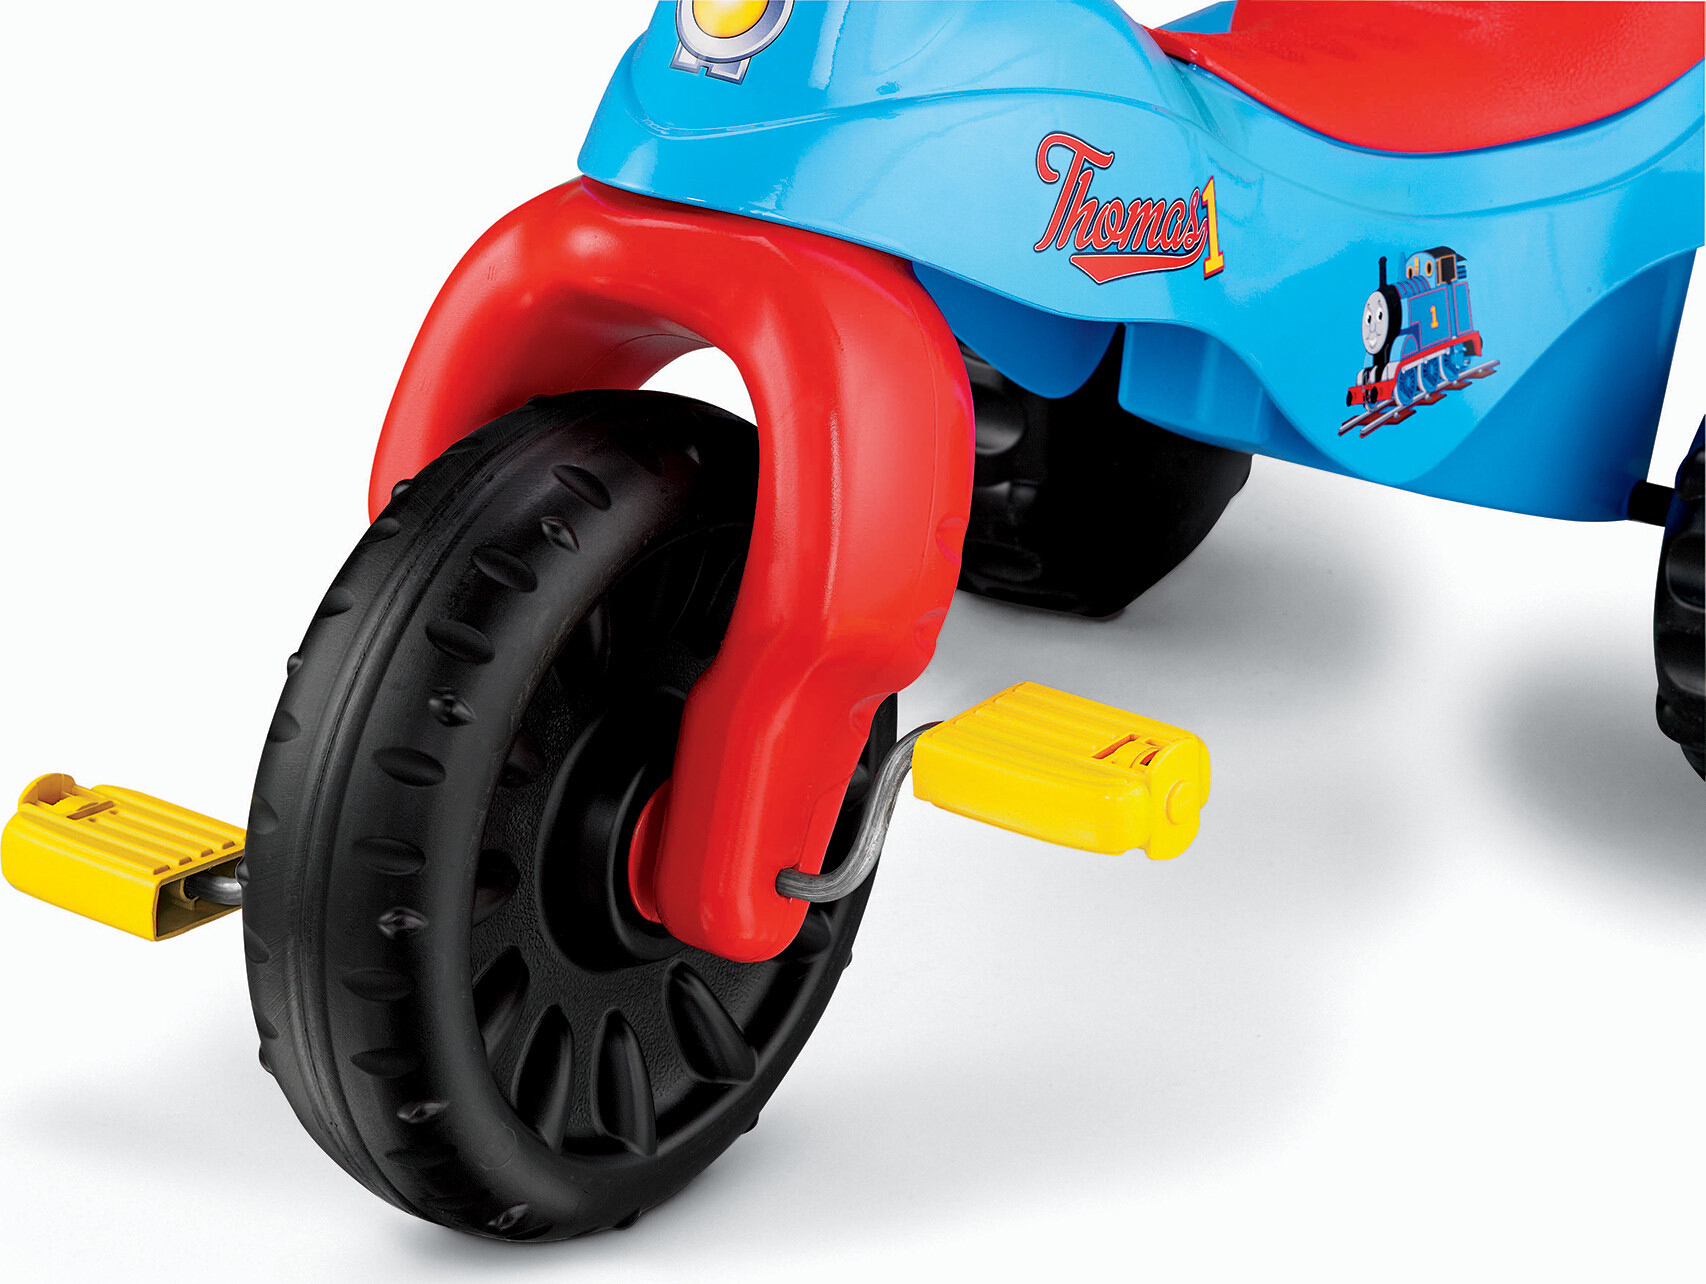 Thomas & Friends Tough Trike Push & Pedal Ride-On Toddler Tricycle - image 4 of 6